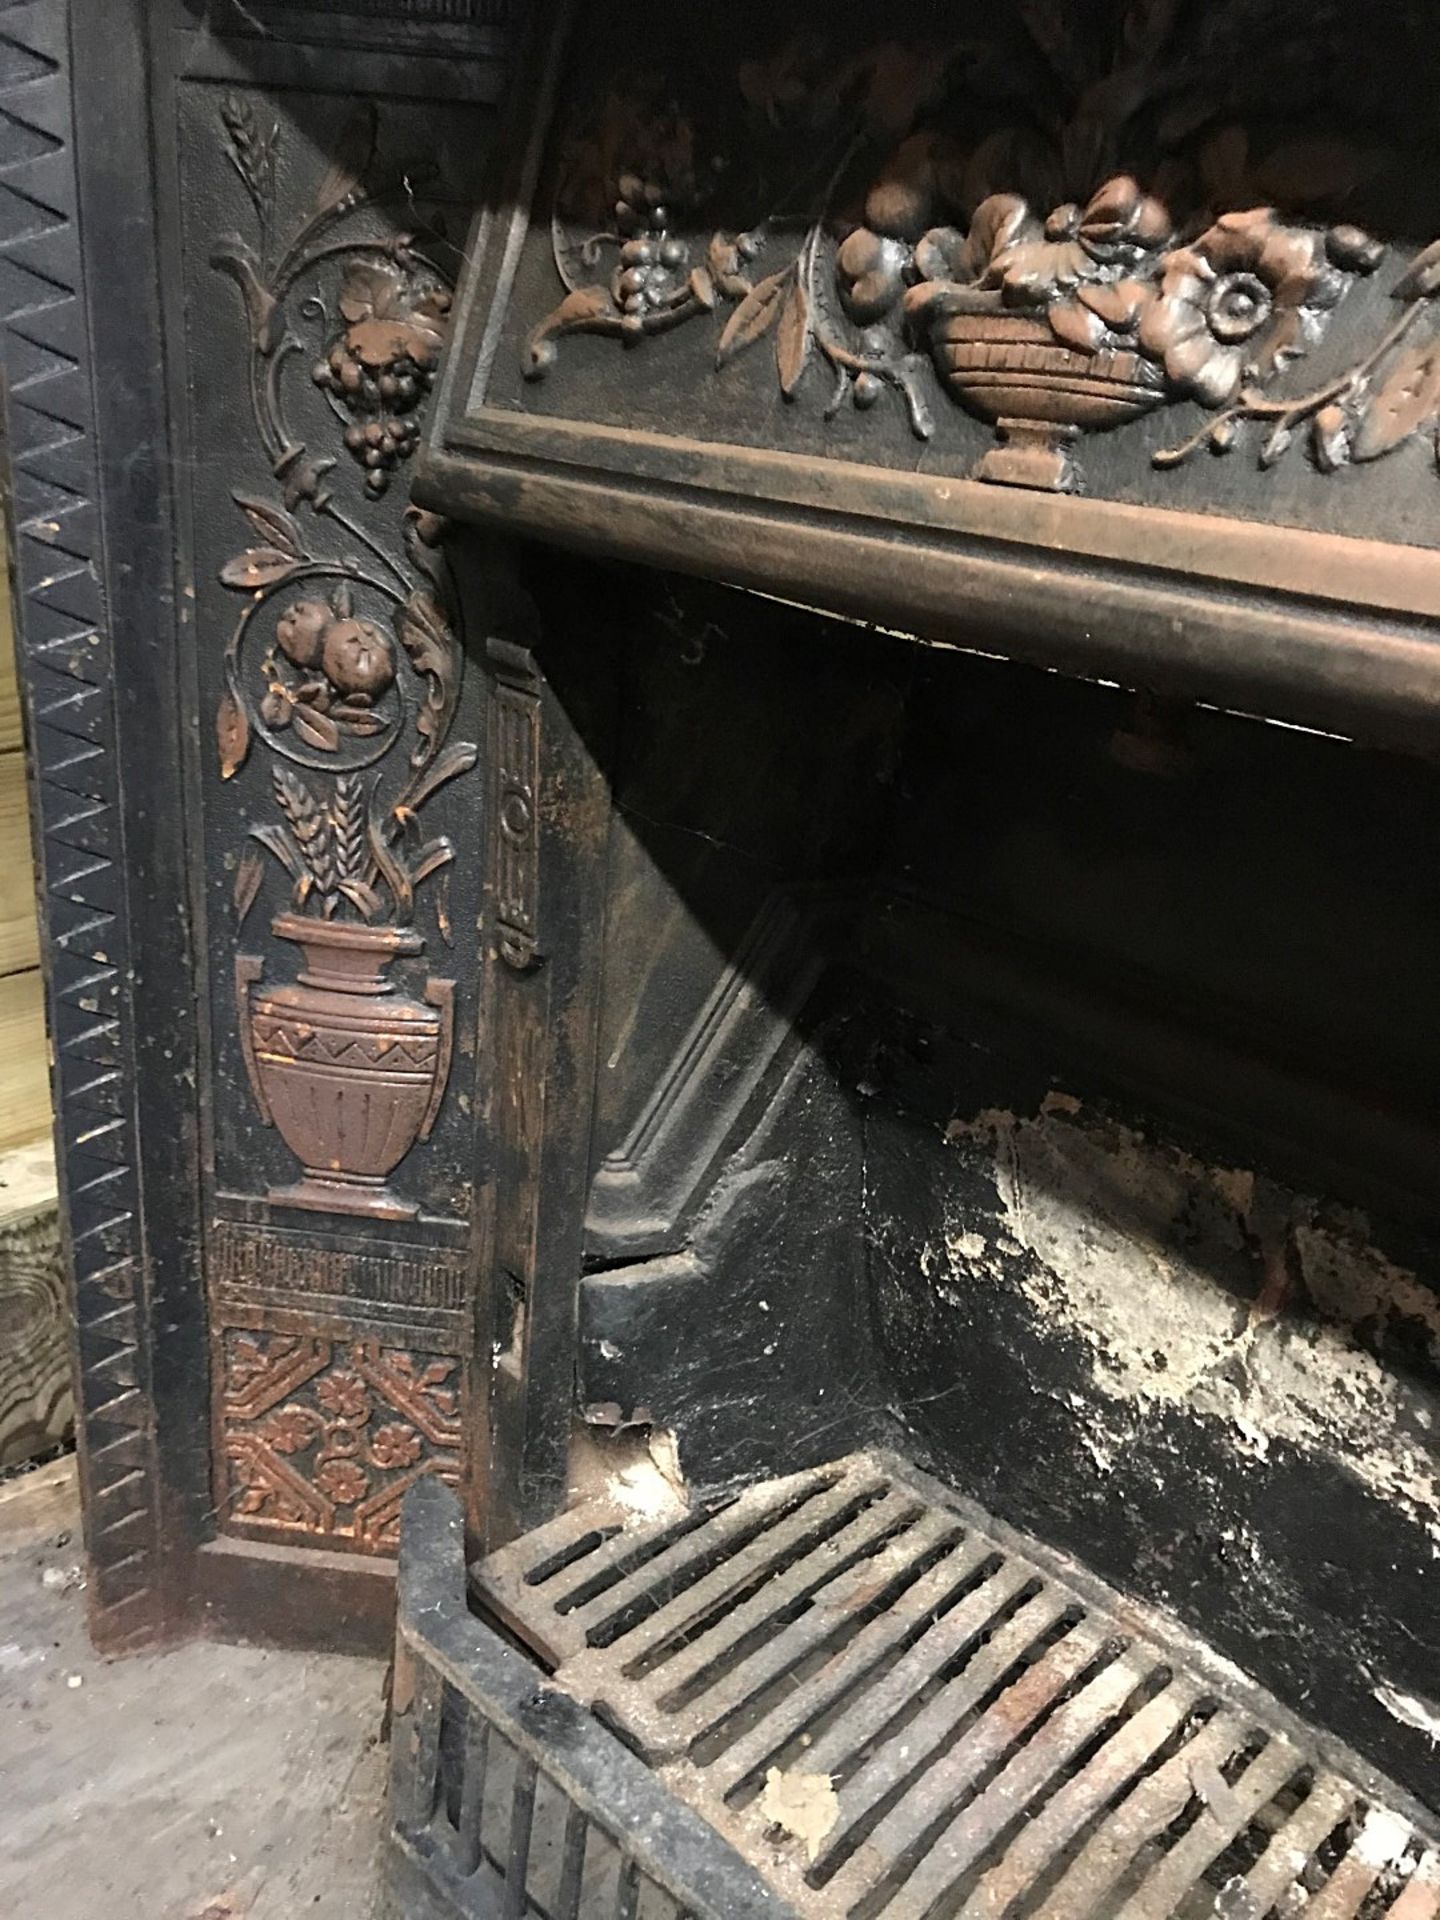 1 x Ultra Rare Stunning Antique Victorian Cast Iron Fire Insert With Ornate Cast Iron Tiles To Side - Image 5 of 5